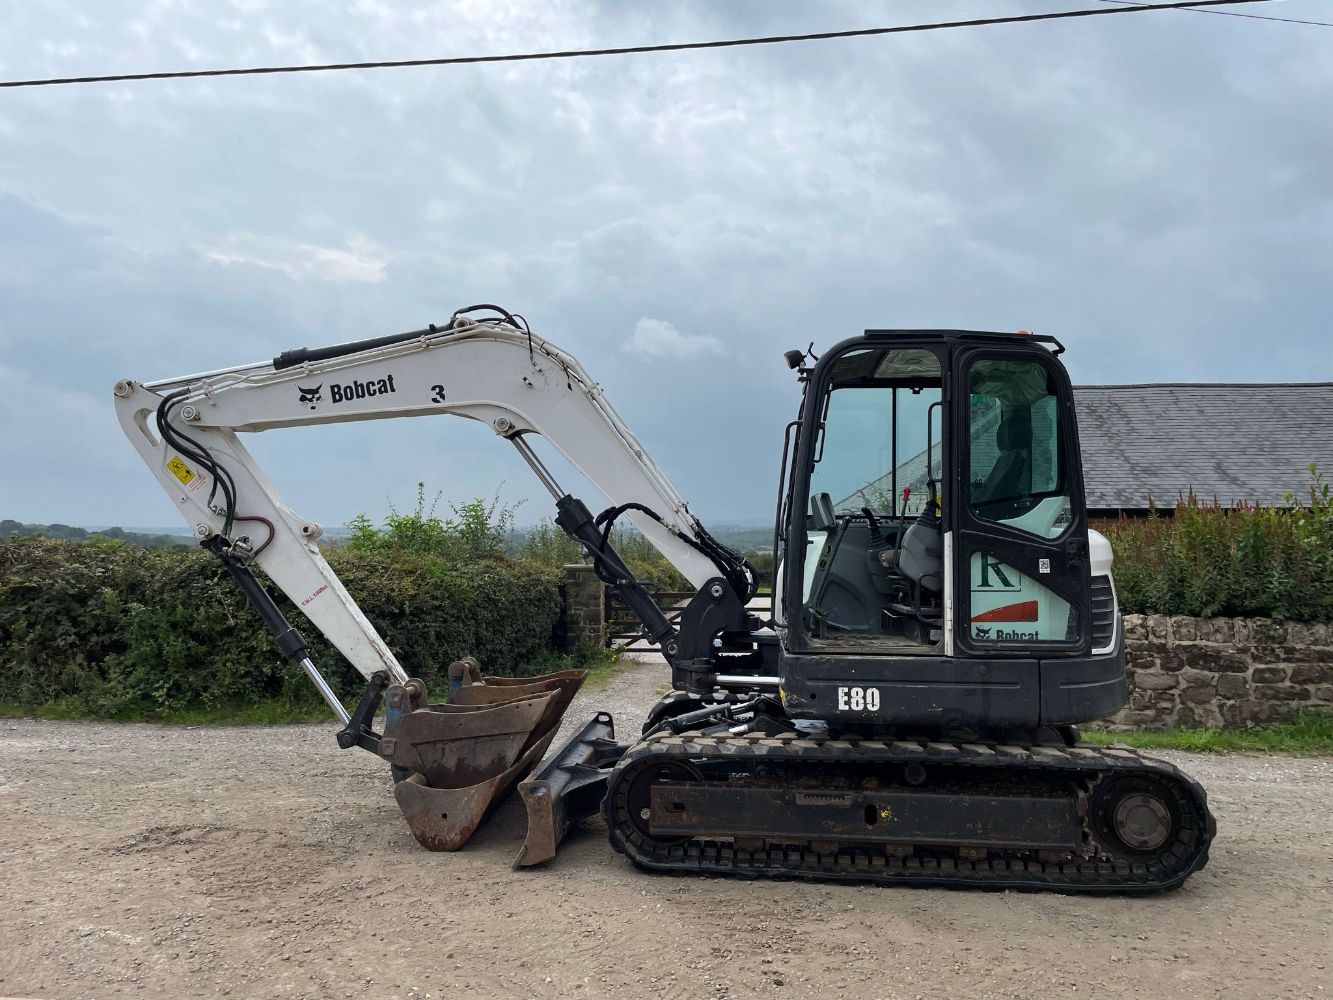 2013 BOBCAT E80 8 TON EXCAVATOR,  2019 JCB HTD-5 DIESEL TRACKED DUMPER, 2013 VAUXHALL CORSA,PALLETS OF FACE MASKS ALL ENDING FROM 7PM TUESDAY!